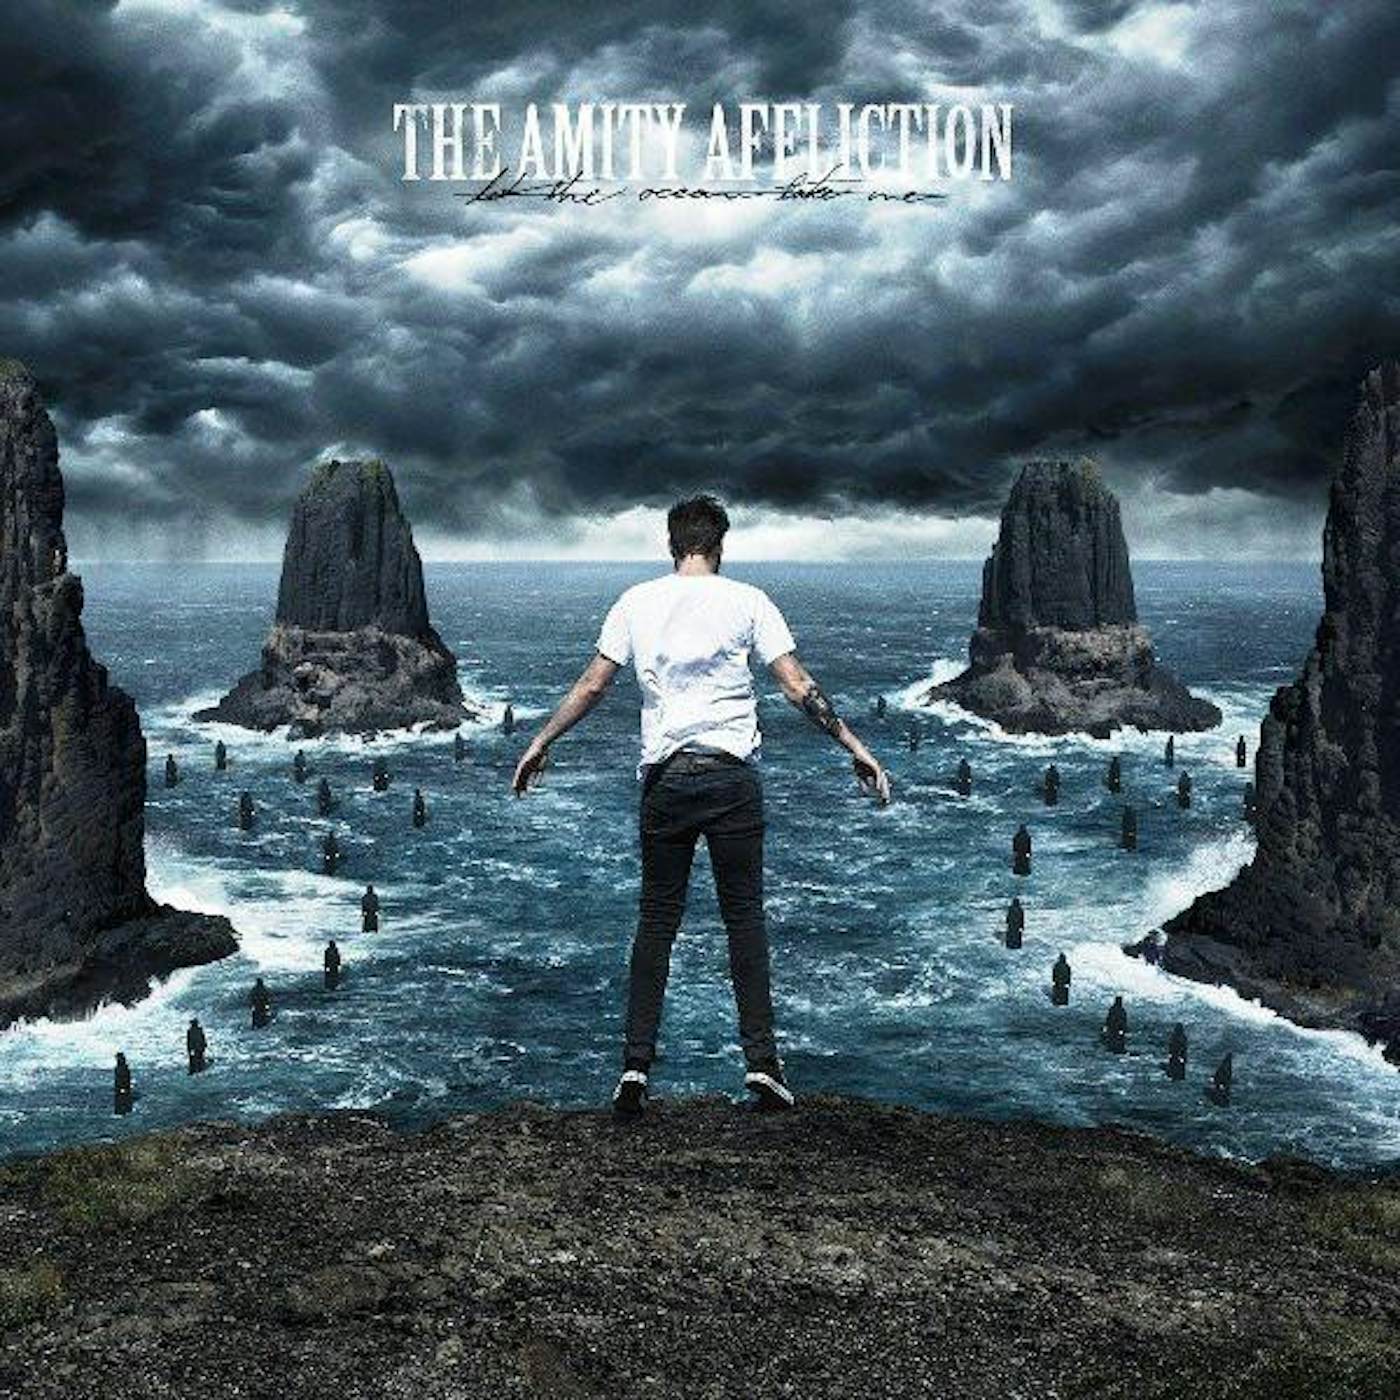 The Amity Affliction LET THE OCEAN TAKE ME CD